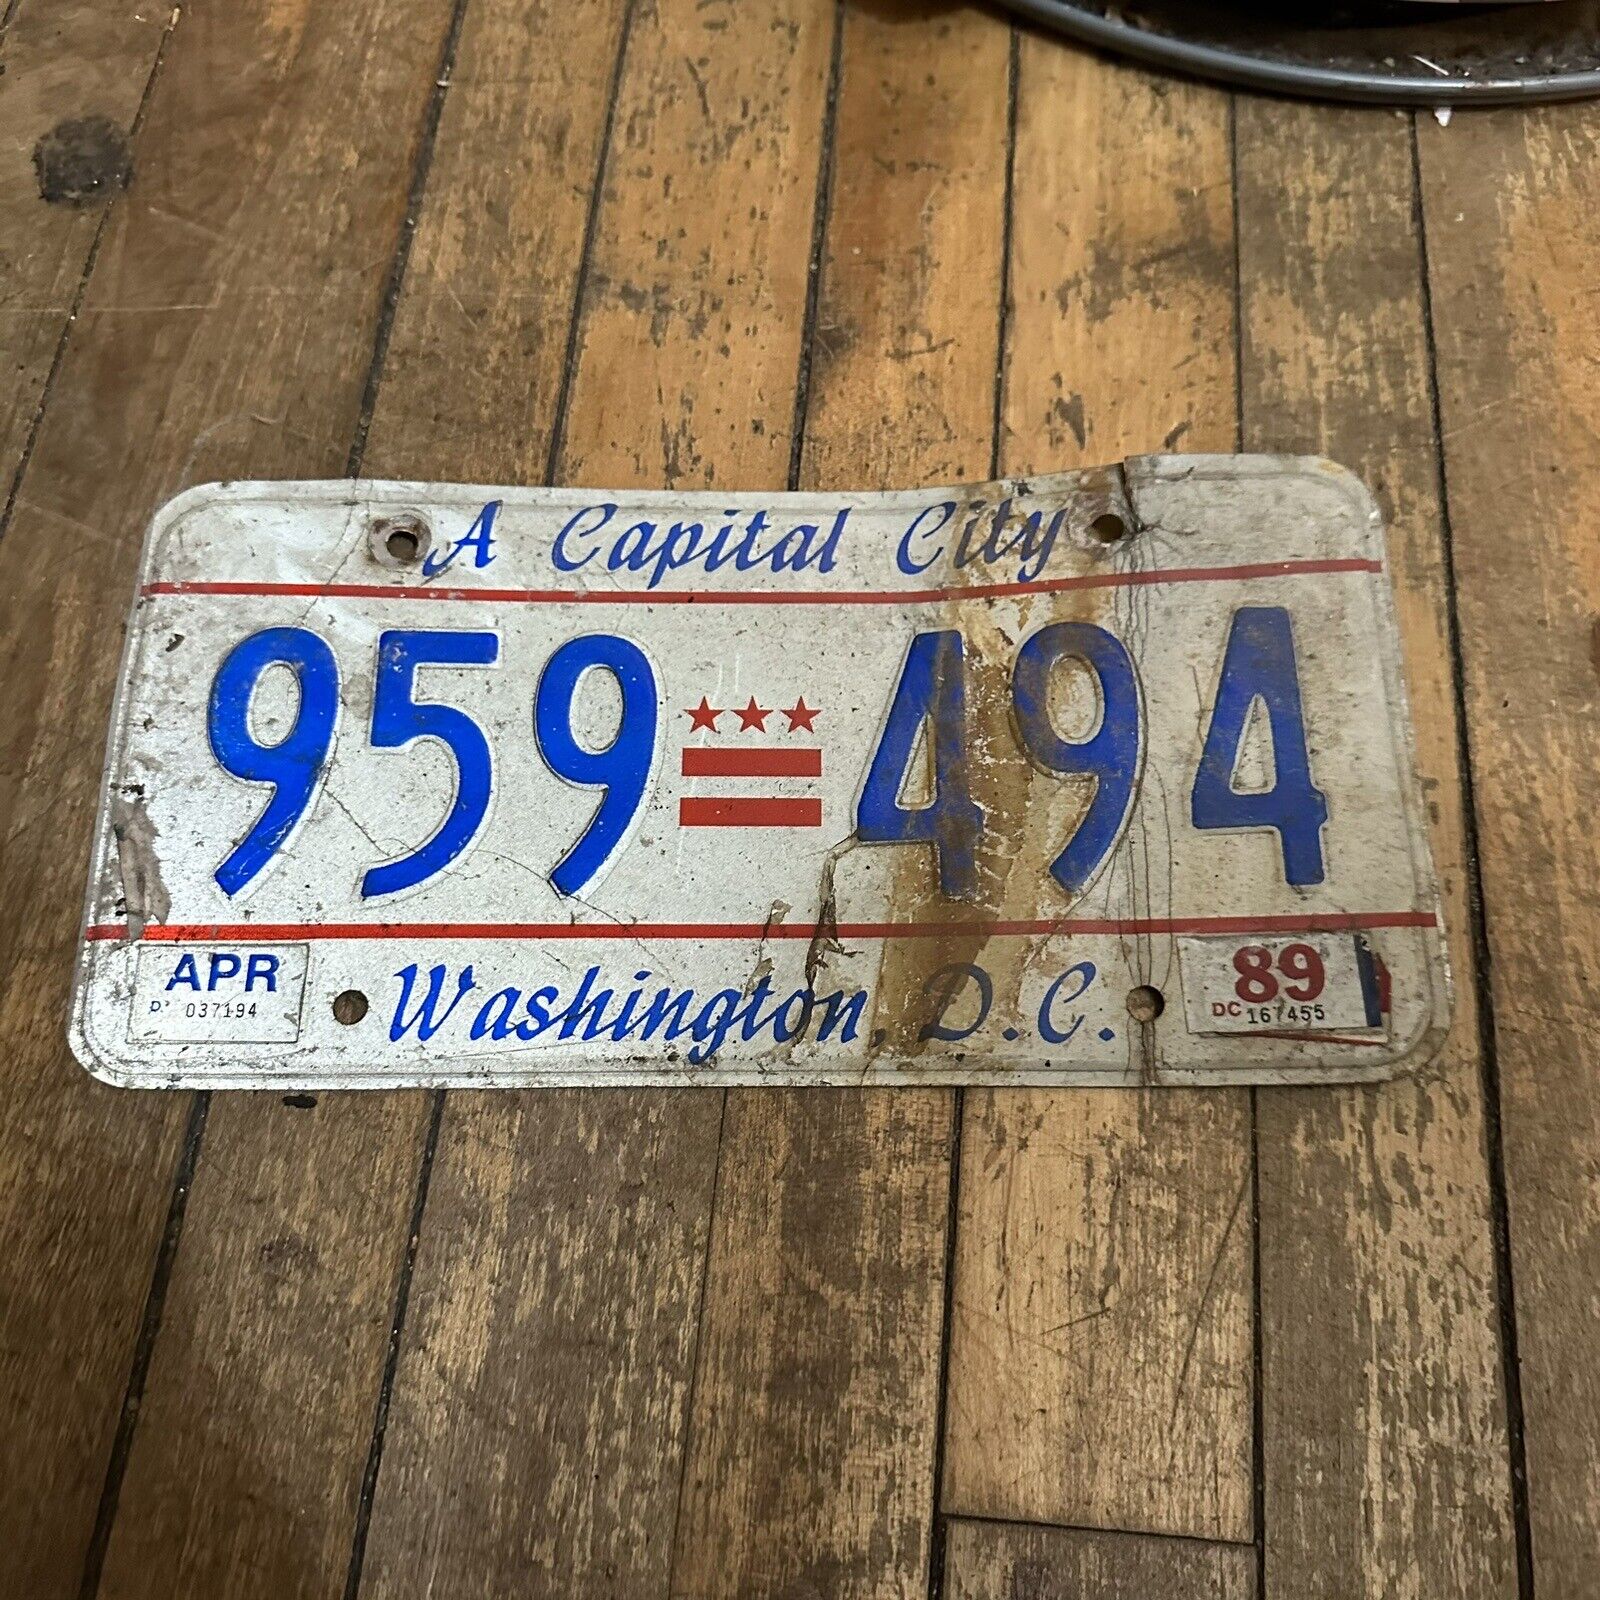 1989 Washington DC District License Plate Low Number Capital City 959 494